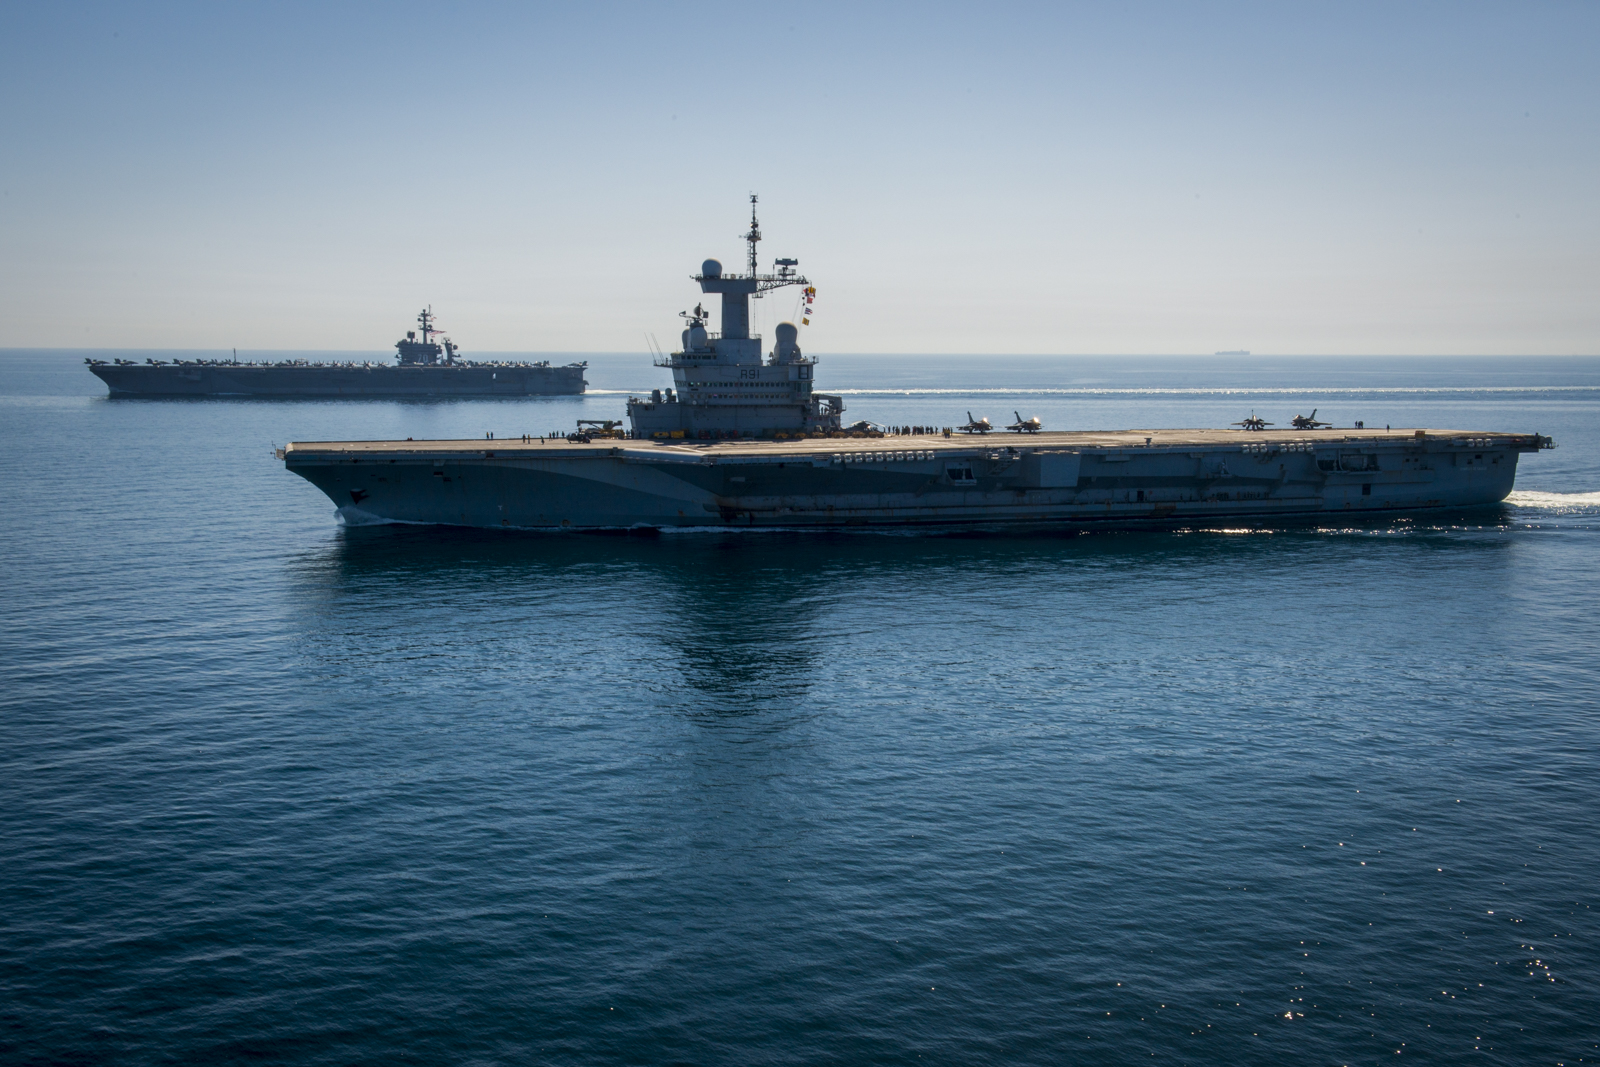 USS Carl Vinson (CVN 70), left, and the French nuclear aircraft carrier Charles de Gaulle (R91) transit the Northern Arabian Gulf in 2015. US Navy Photo